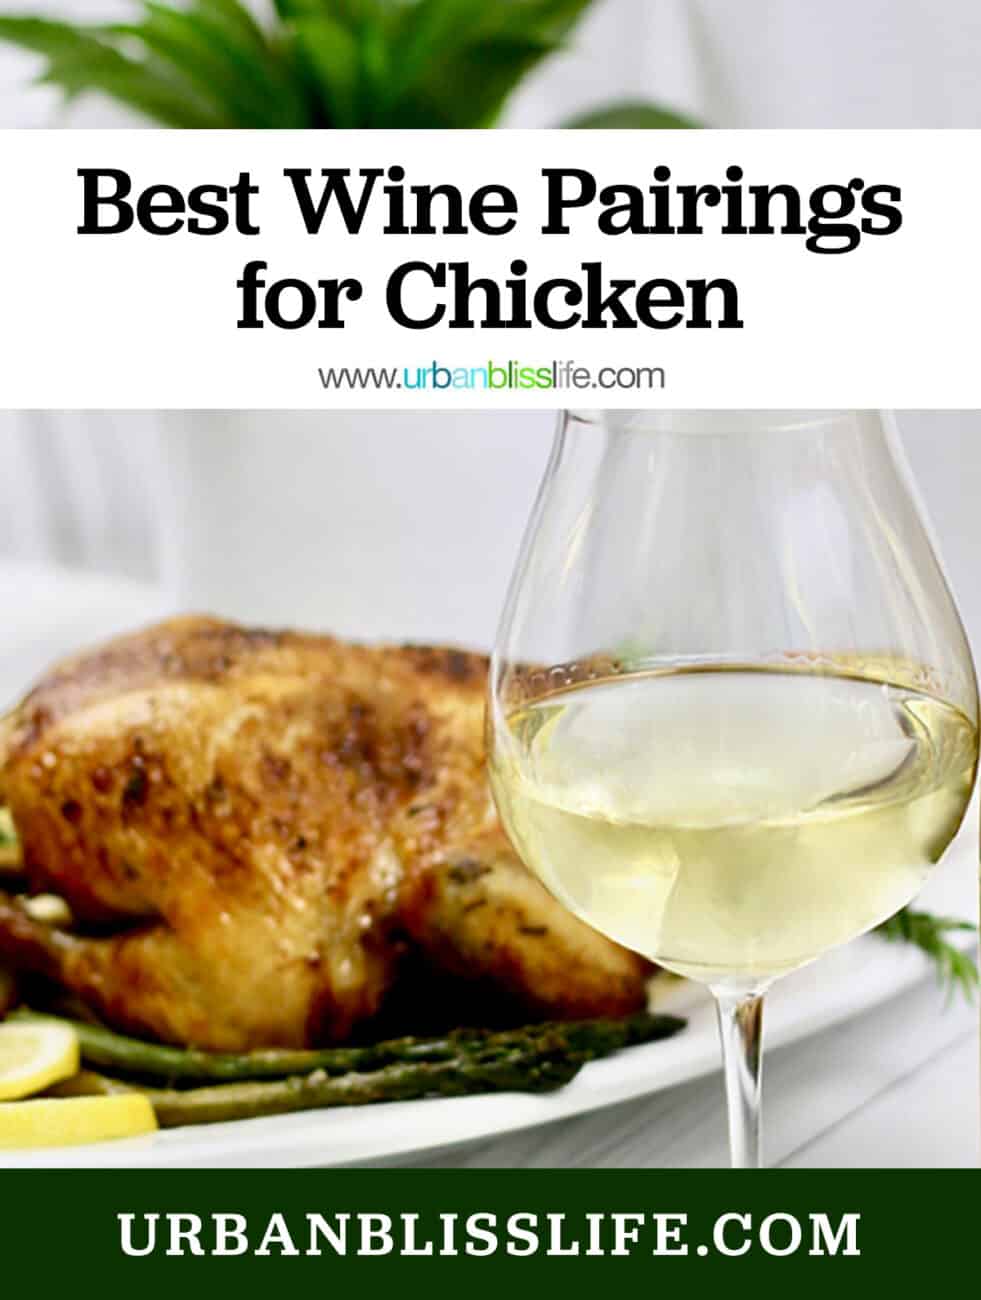 glass of white wine in front of a roast chicken, with title text that reads "Best Wine Pairings for Chicken."